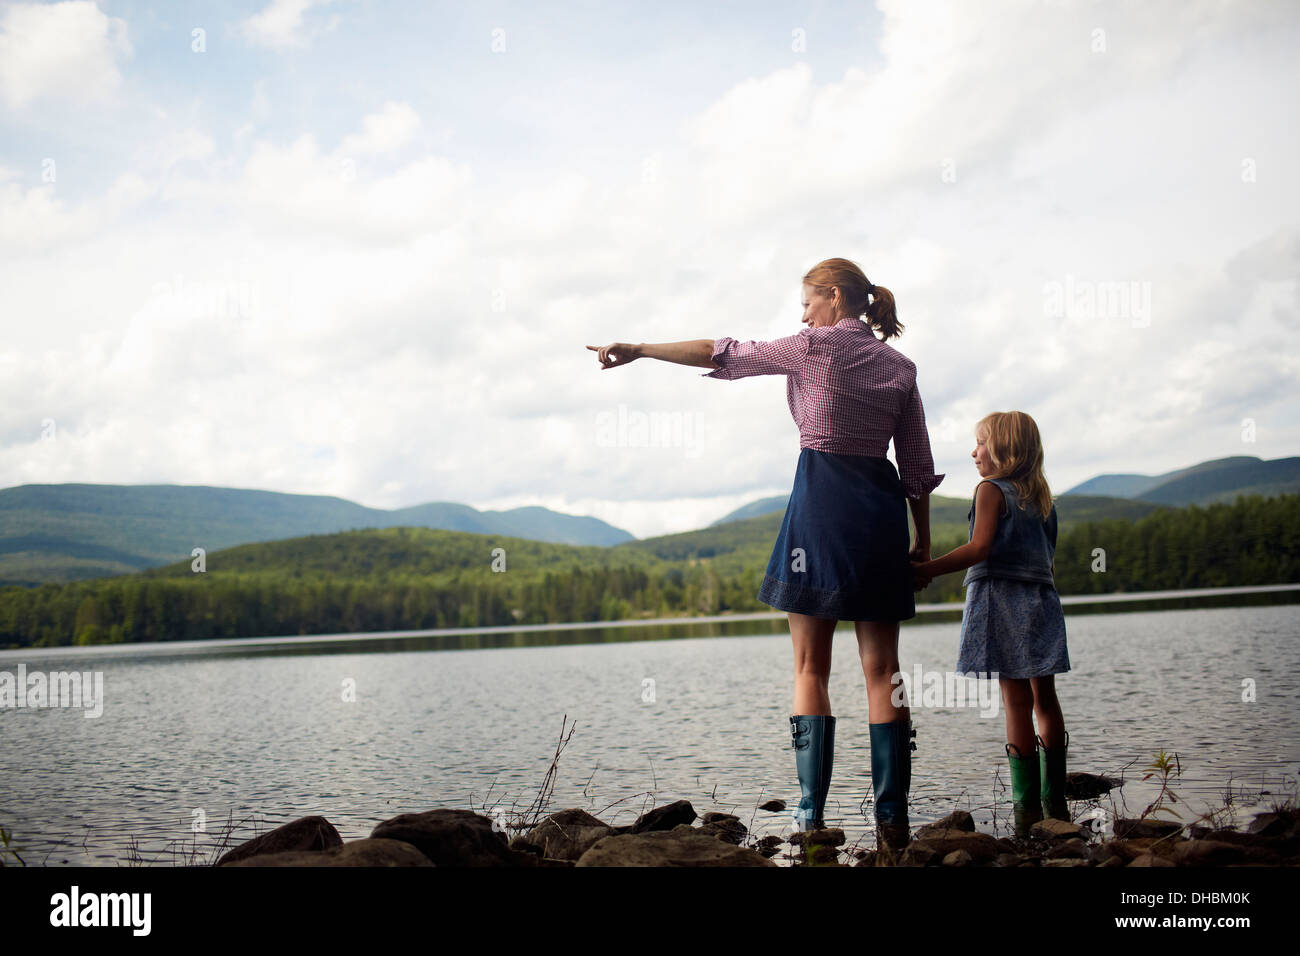 Two people, a woman and a child standing side by side and looking over water. Stock Photo